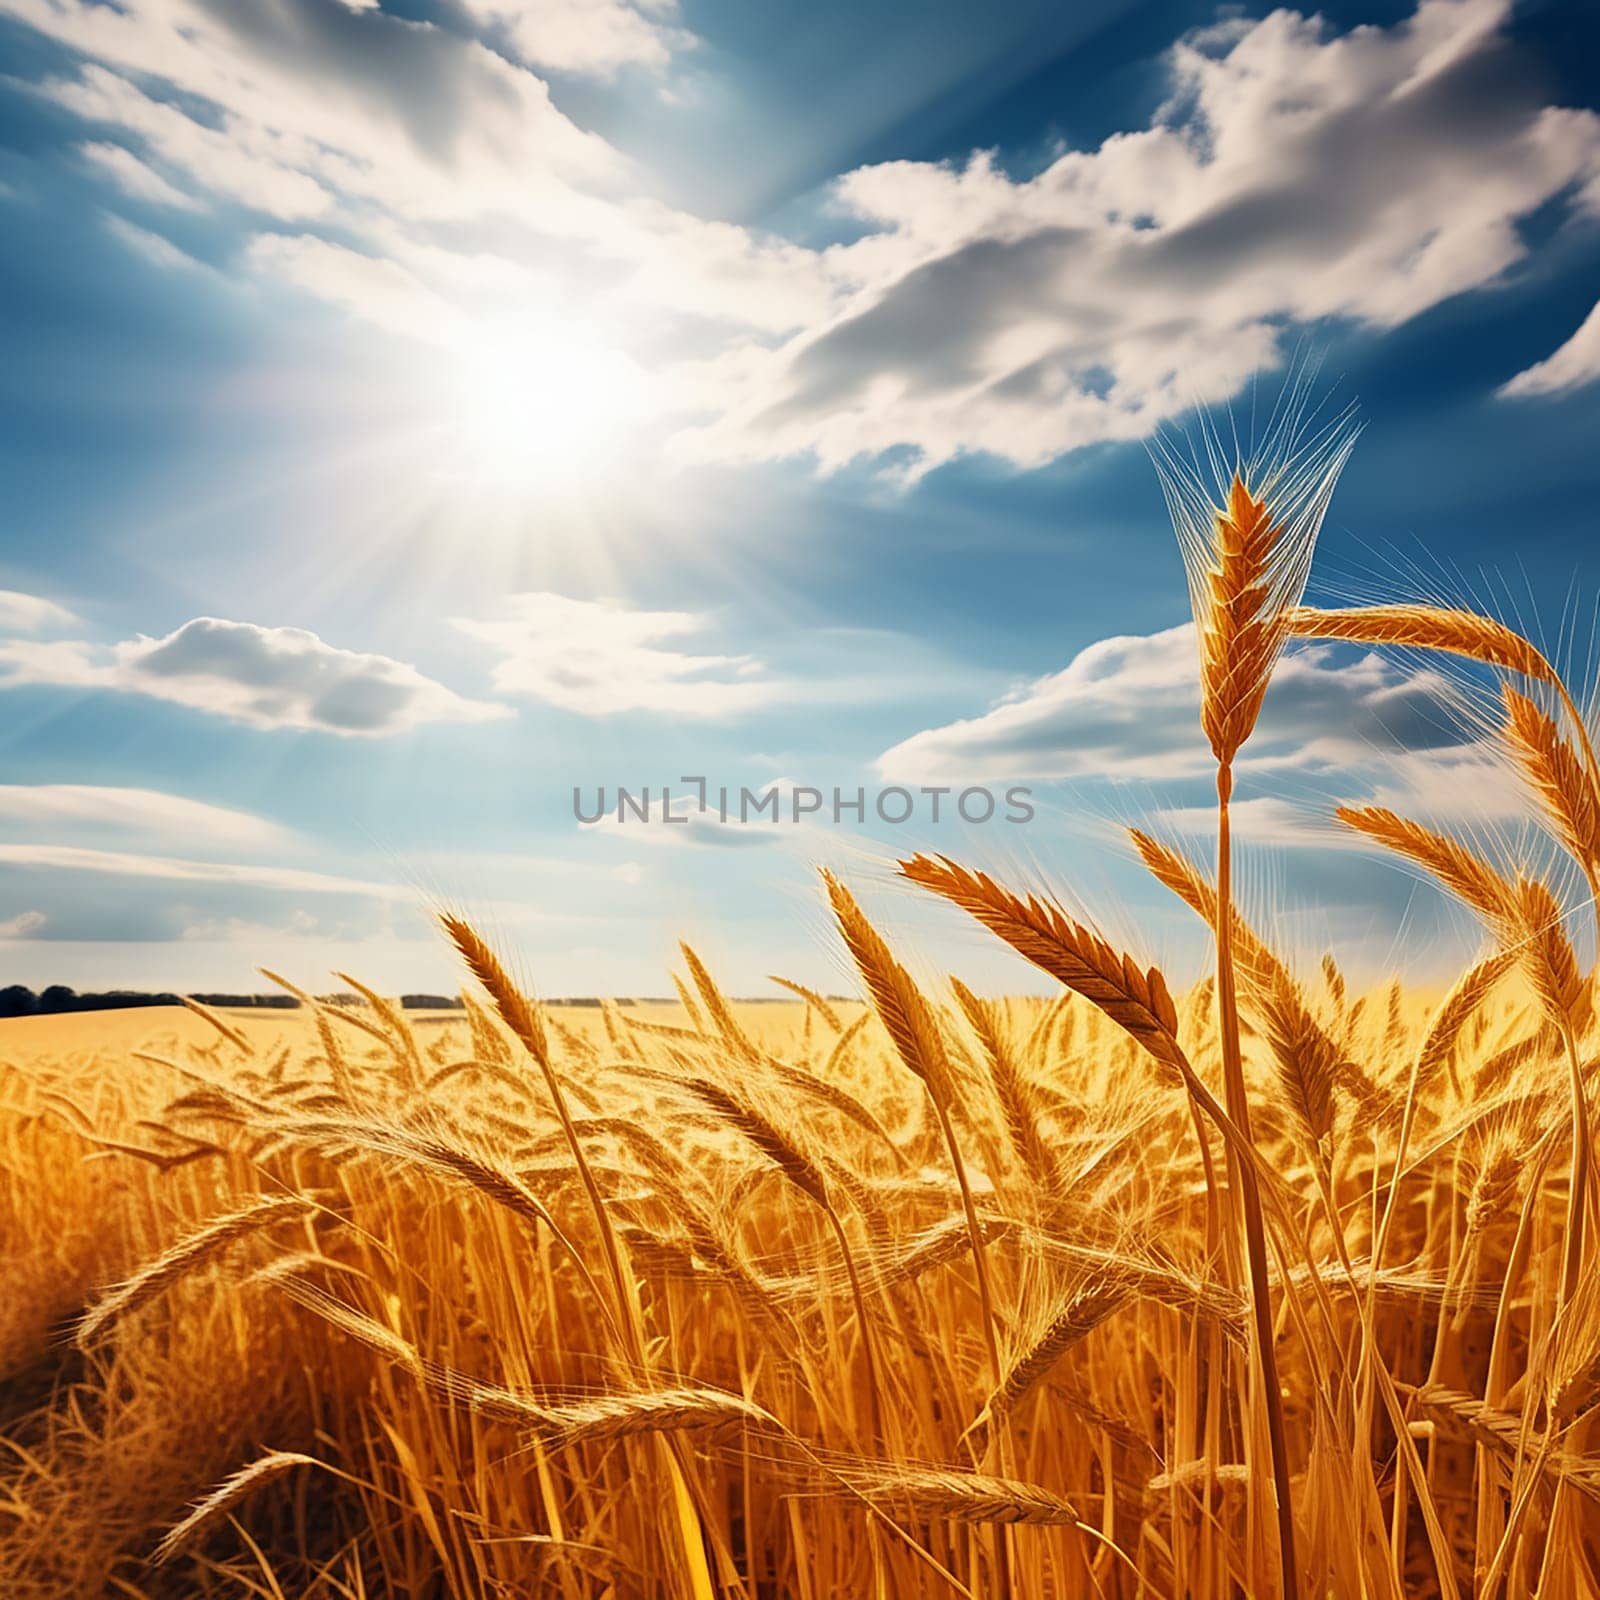 Sunlit Harvest: Basking in the Beauty of a Golden Wheat Field by Petrichor